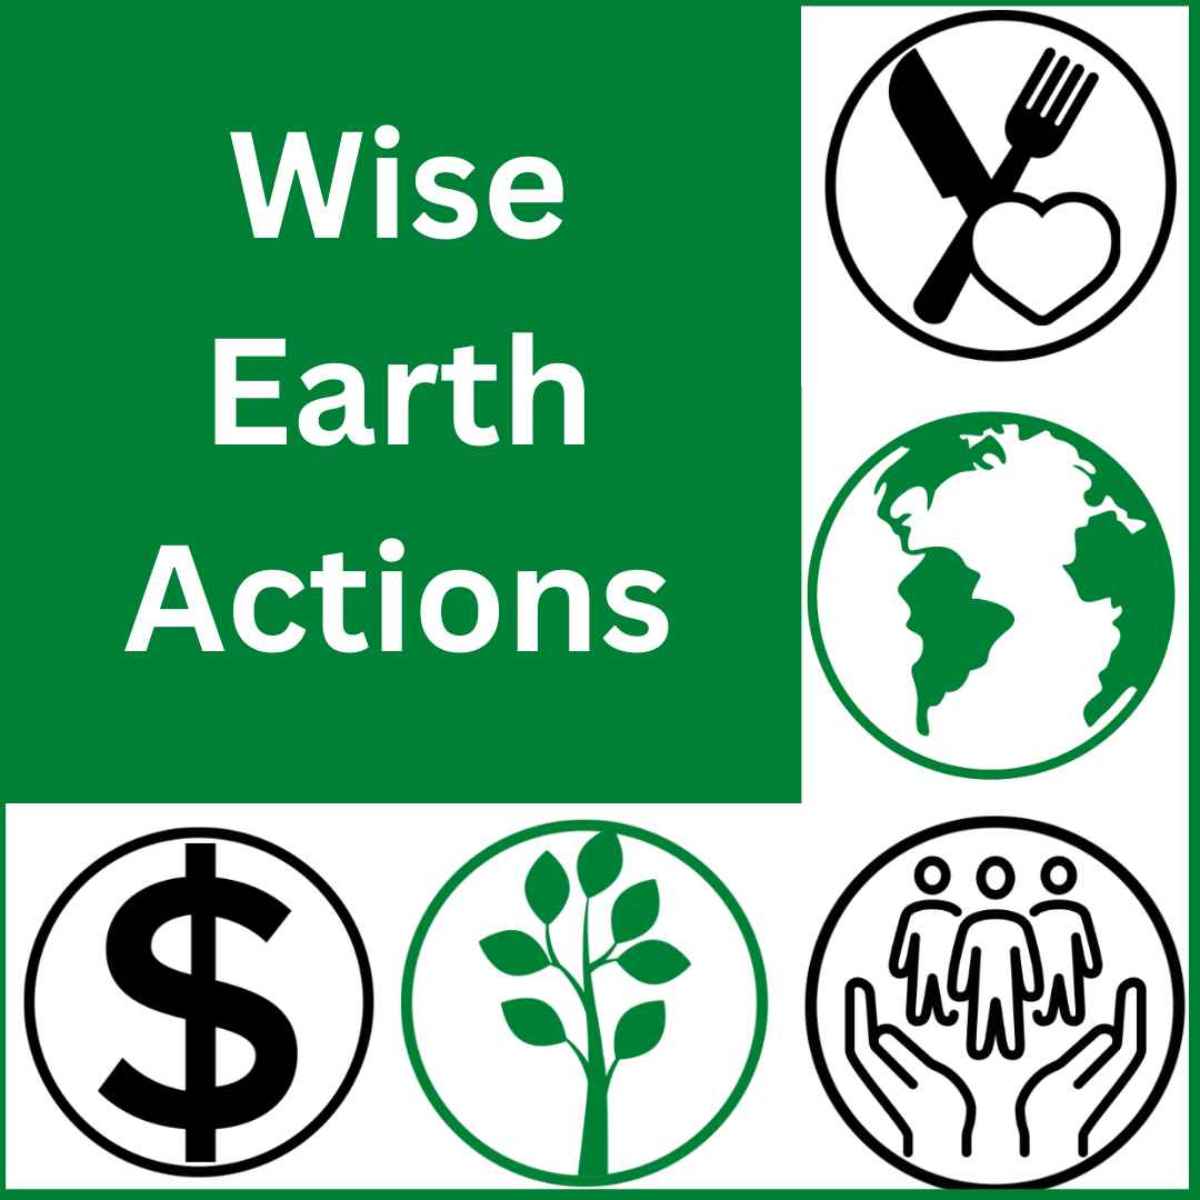 Wise Earth Actions title card